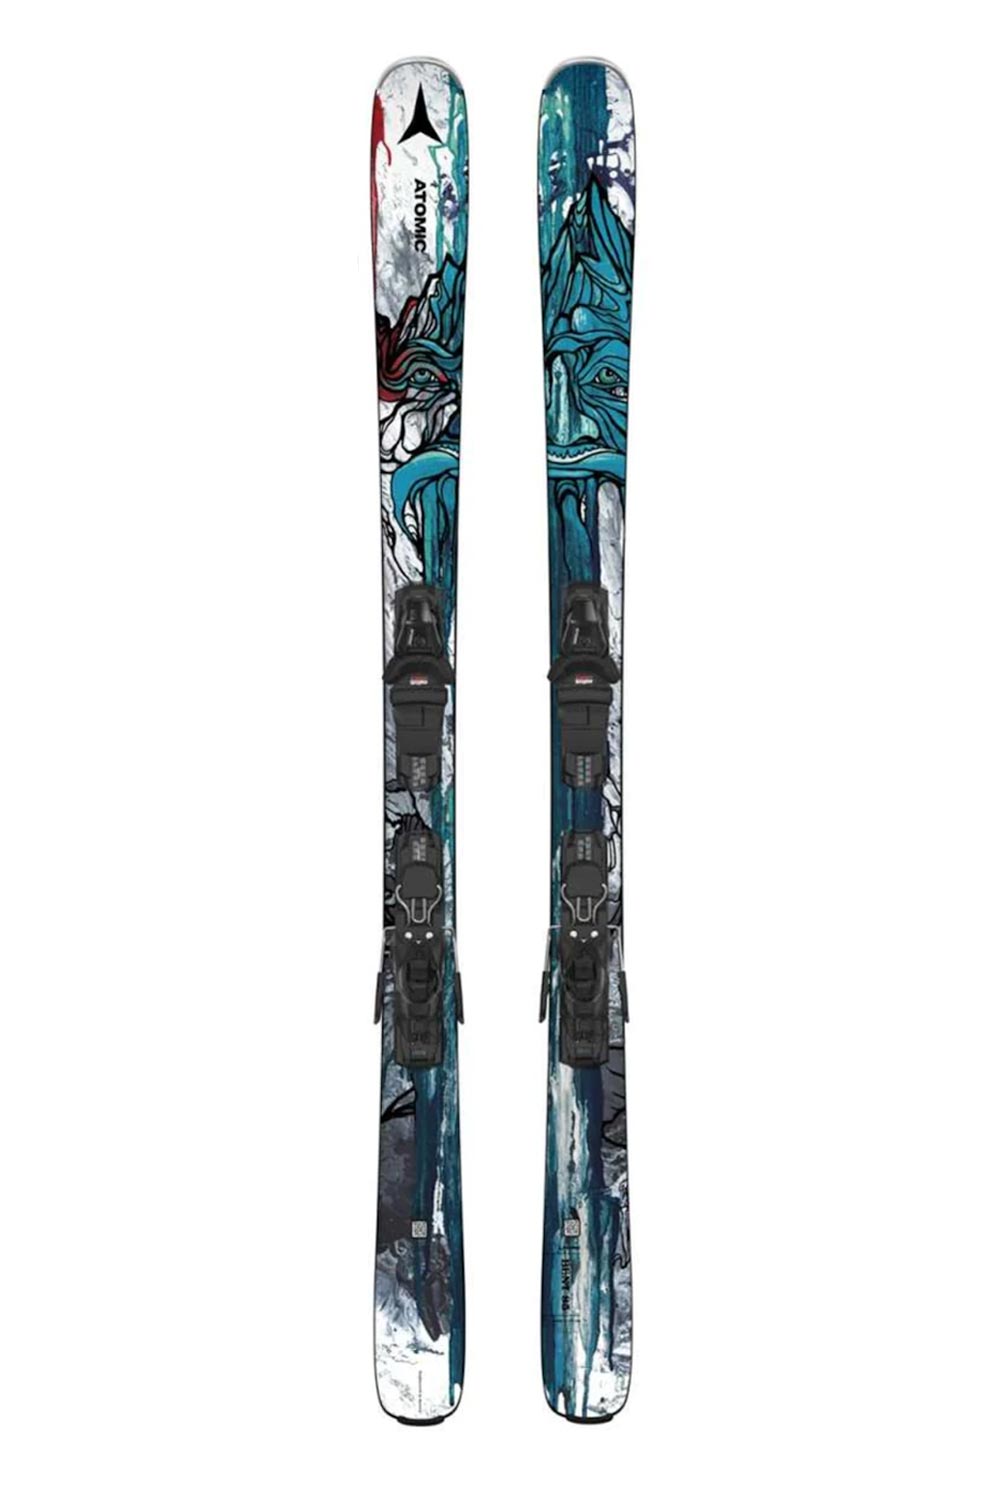 Atomic Bent 85 system skis with bindings